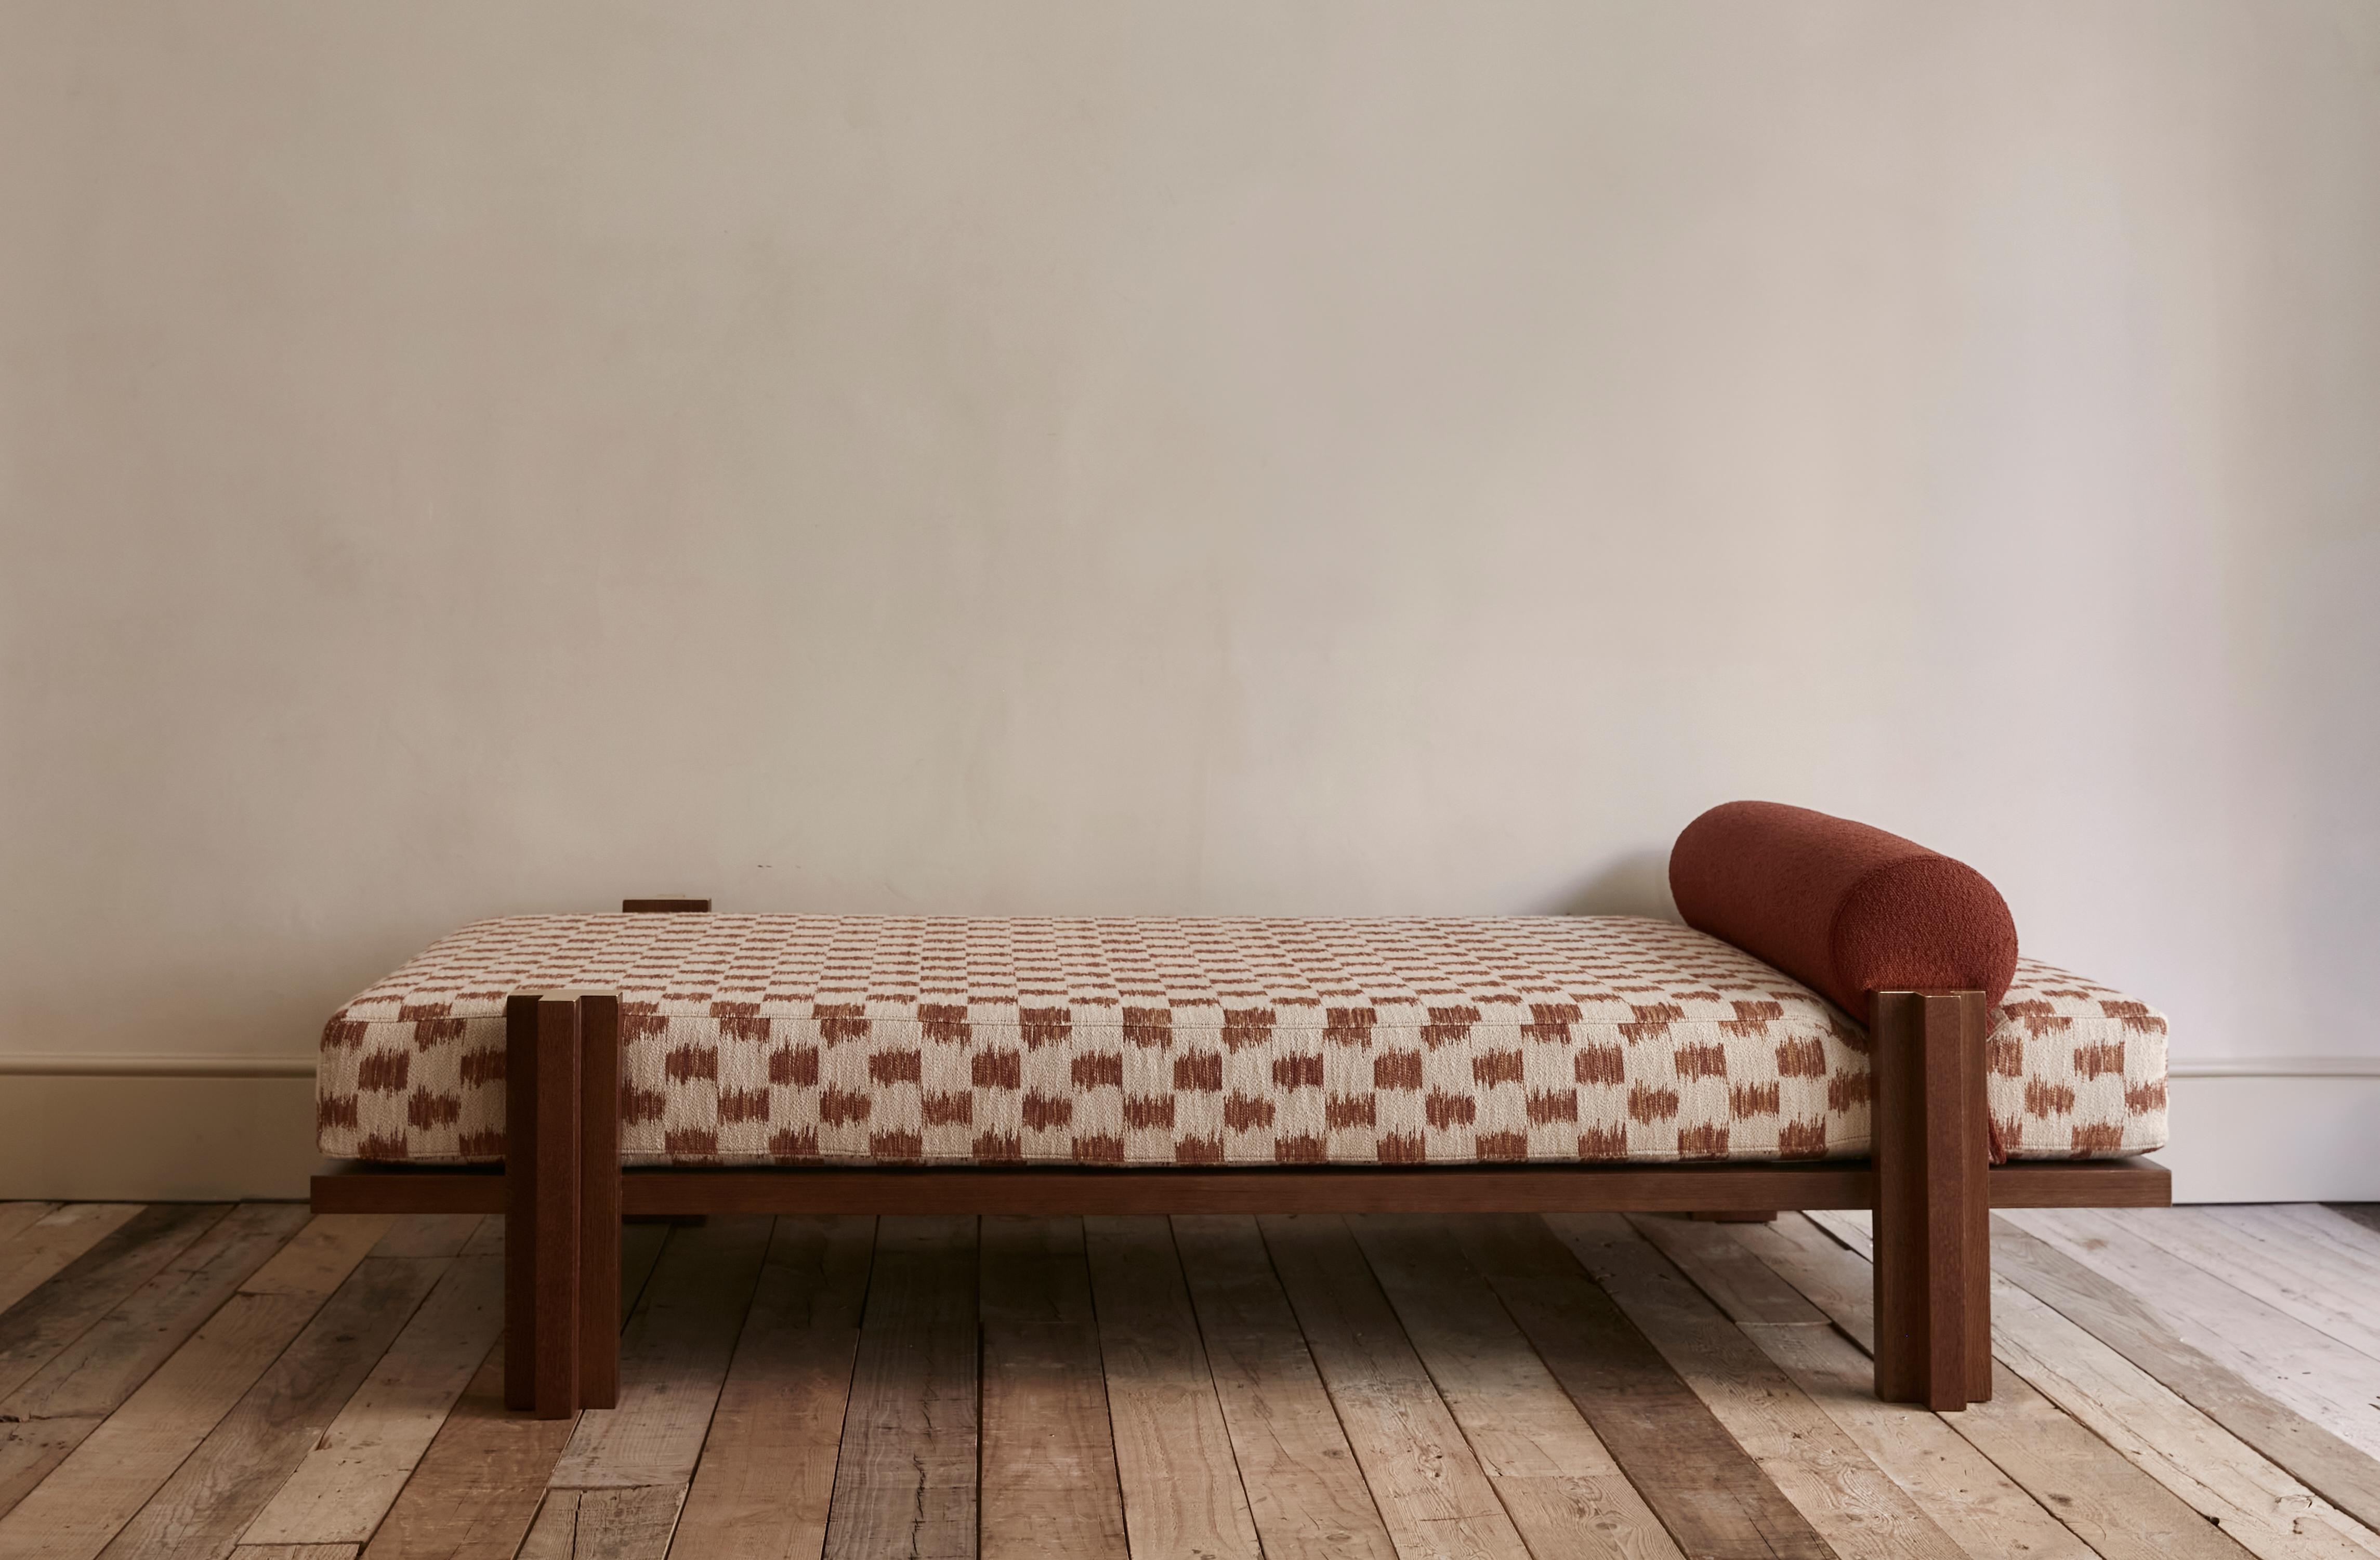 One of a kind piece created by spanish architecture studio Sierra de la Higuera. It is a resting element, chaise lounge type, structure in walnut veneer. Details in brass that finish the structure of the piece. The textile upholstery can be combined